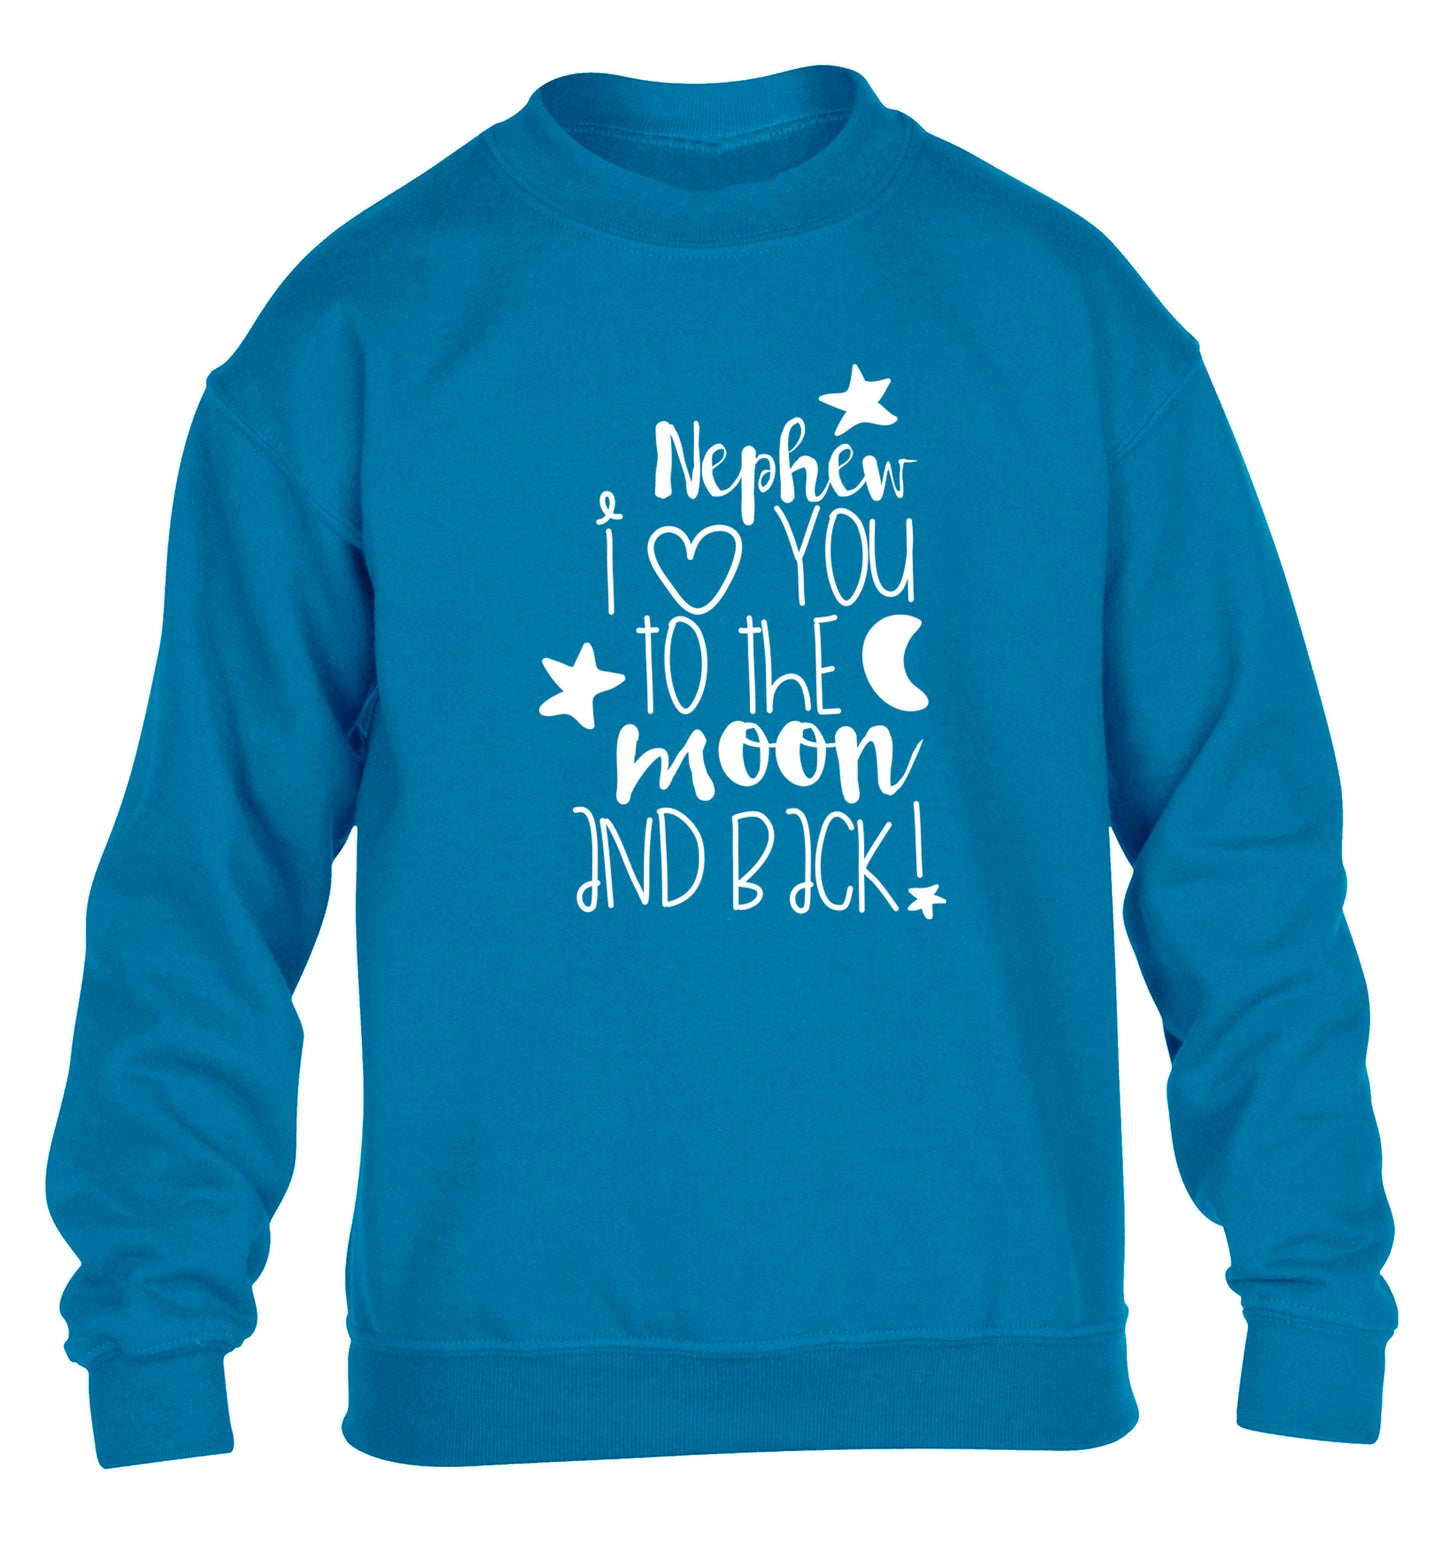 Nephew I love you to the moon and back children's blue  sweater 12-14 Years